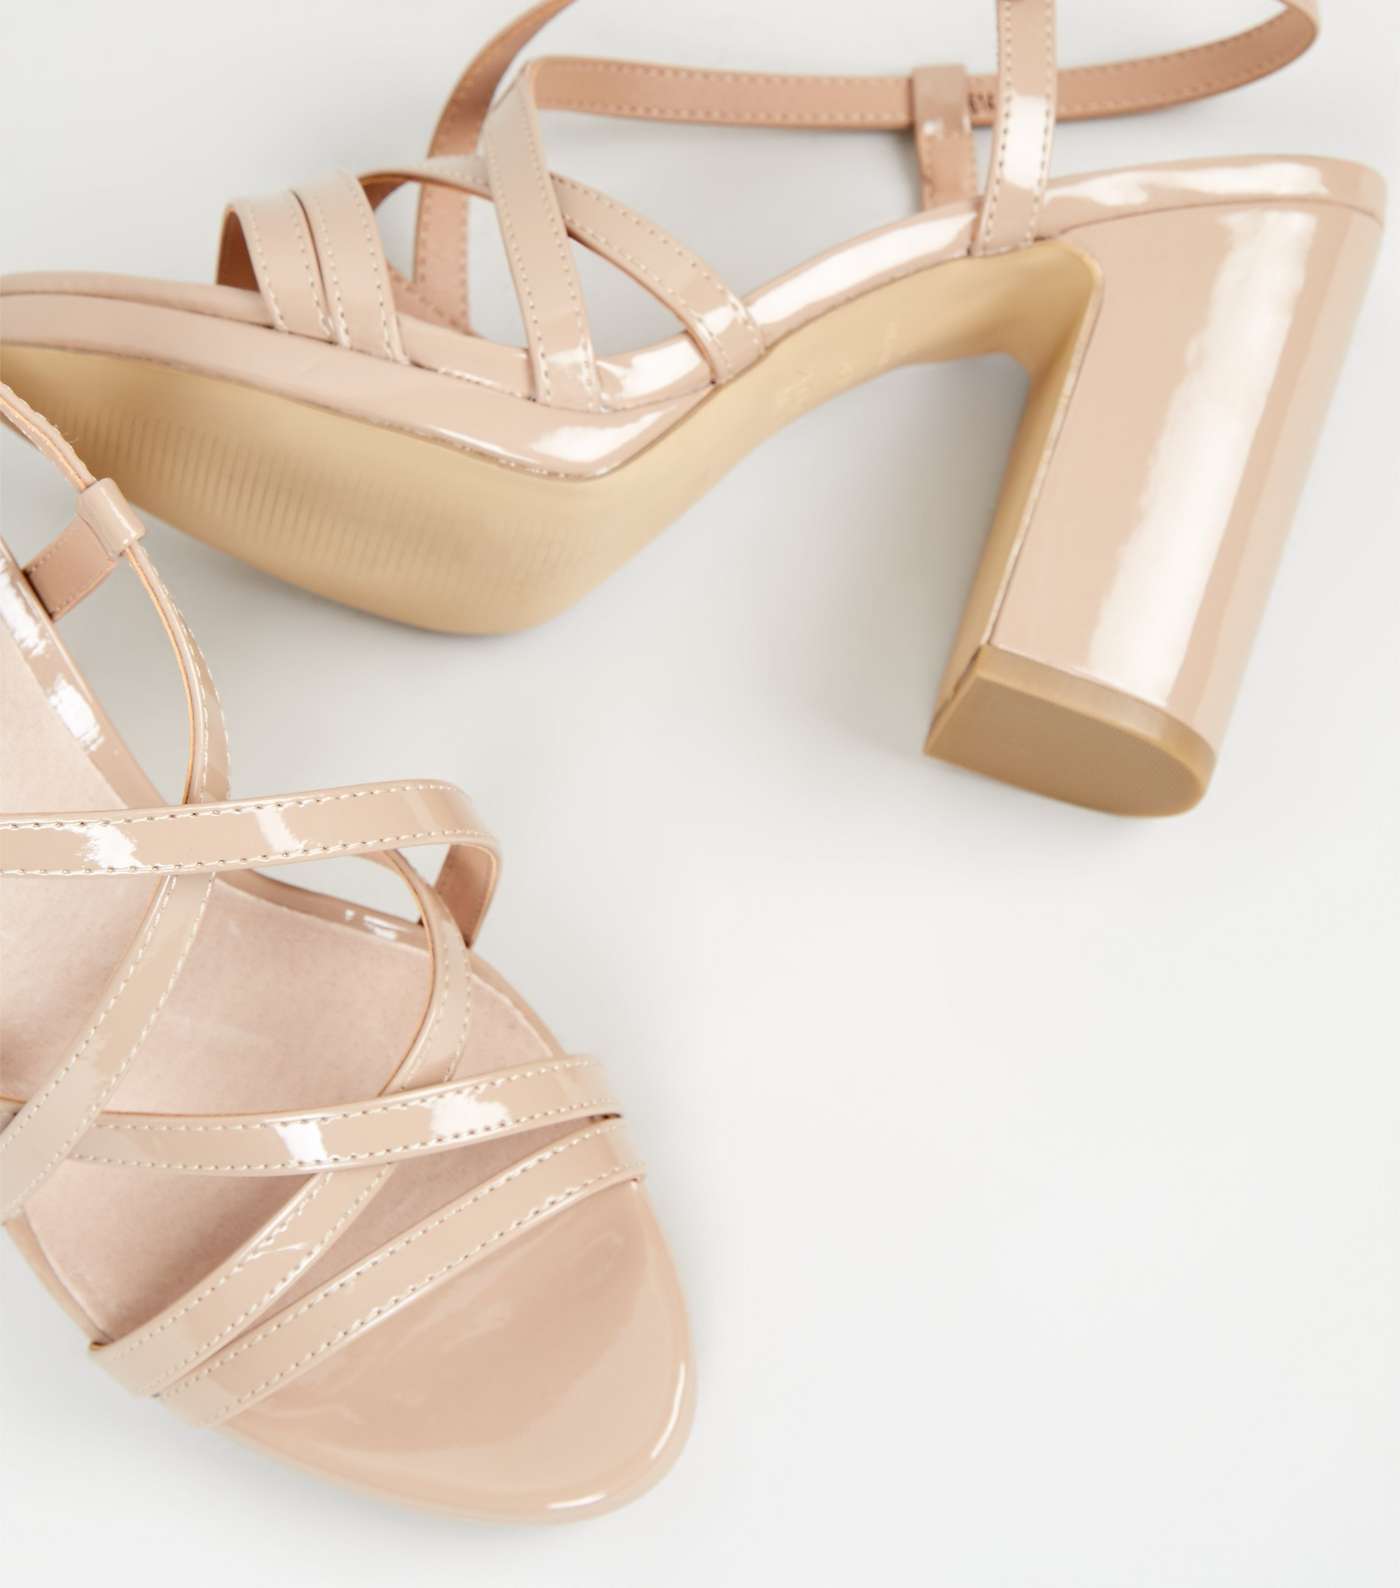 Nude Comfort Flex Patent Strappy Heeled Sandals Image 3